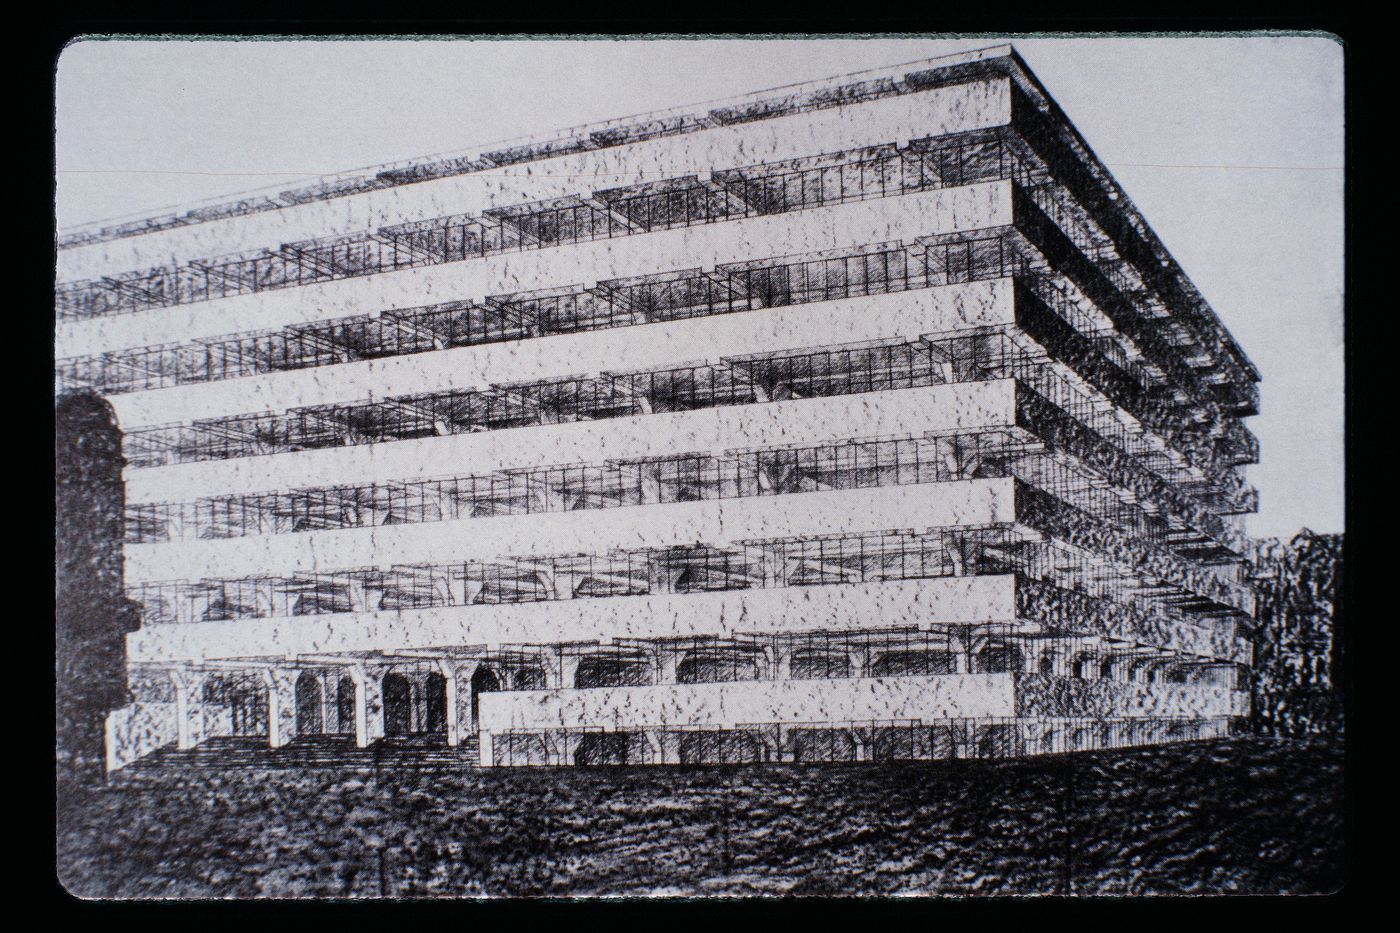 Slide of a drawing for Concrete Office Building, Berlin, by Mies van der Rohe